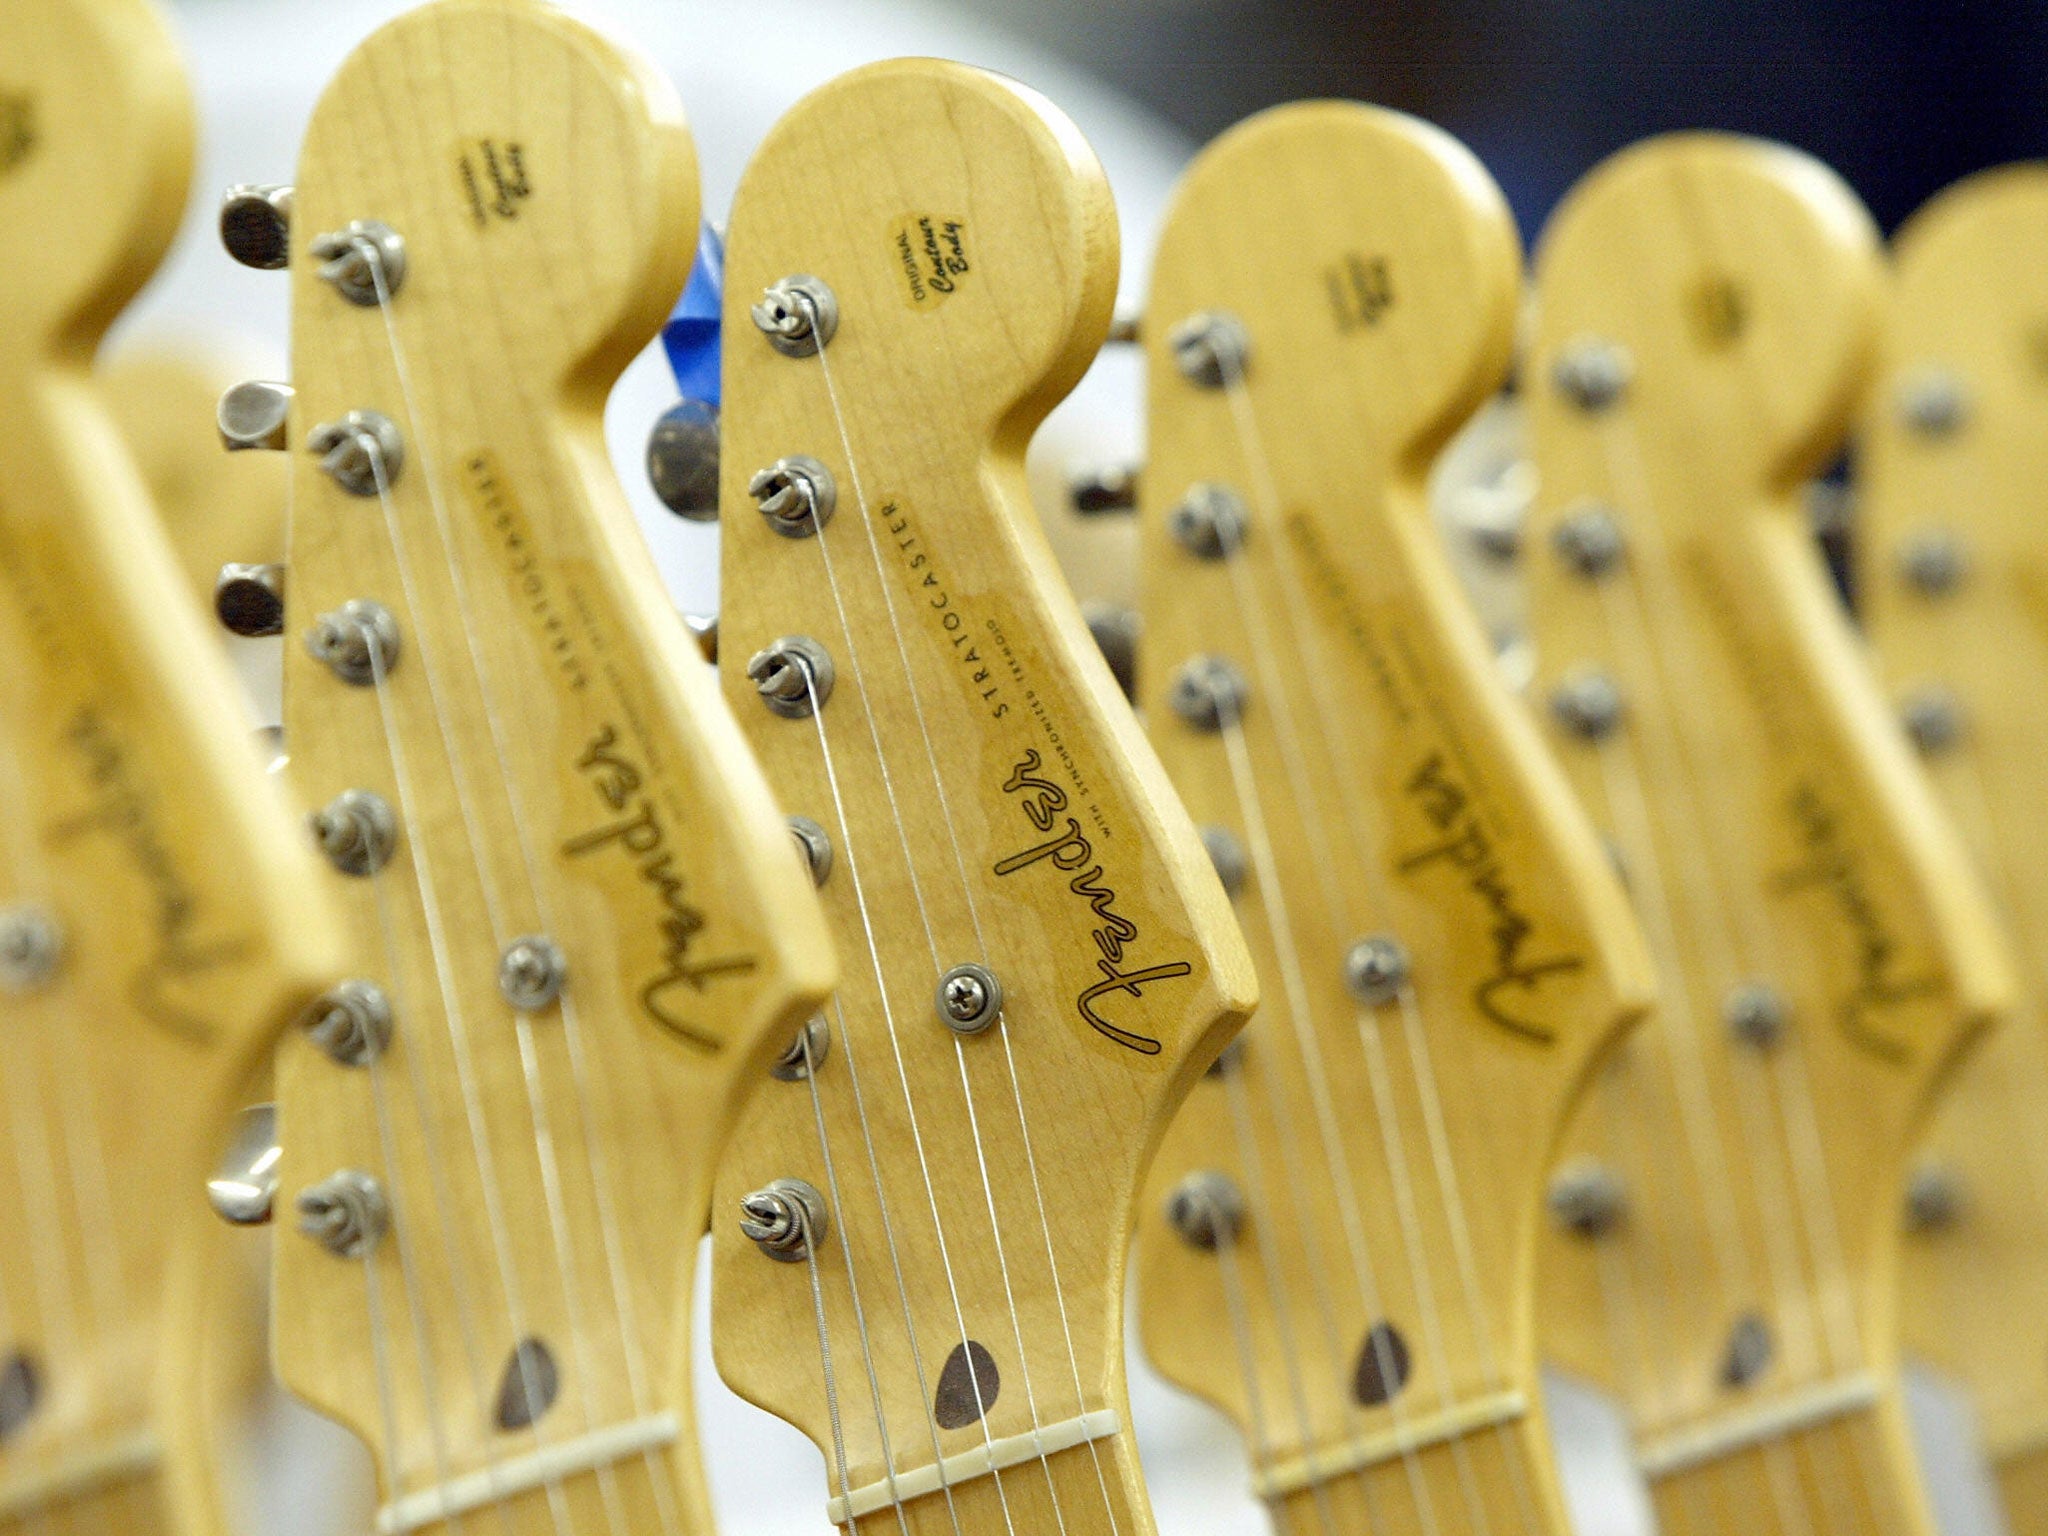 Stratocaster guitars, unrelated to the auction, at the Fender manufacturing facility in Corona, California.